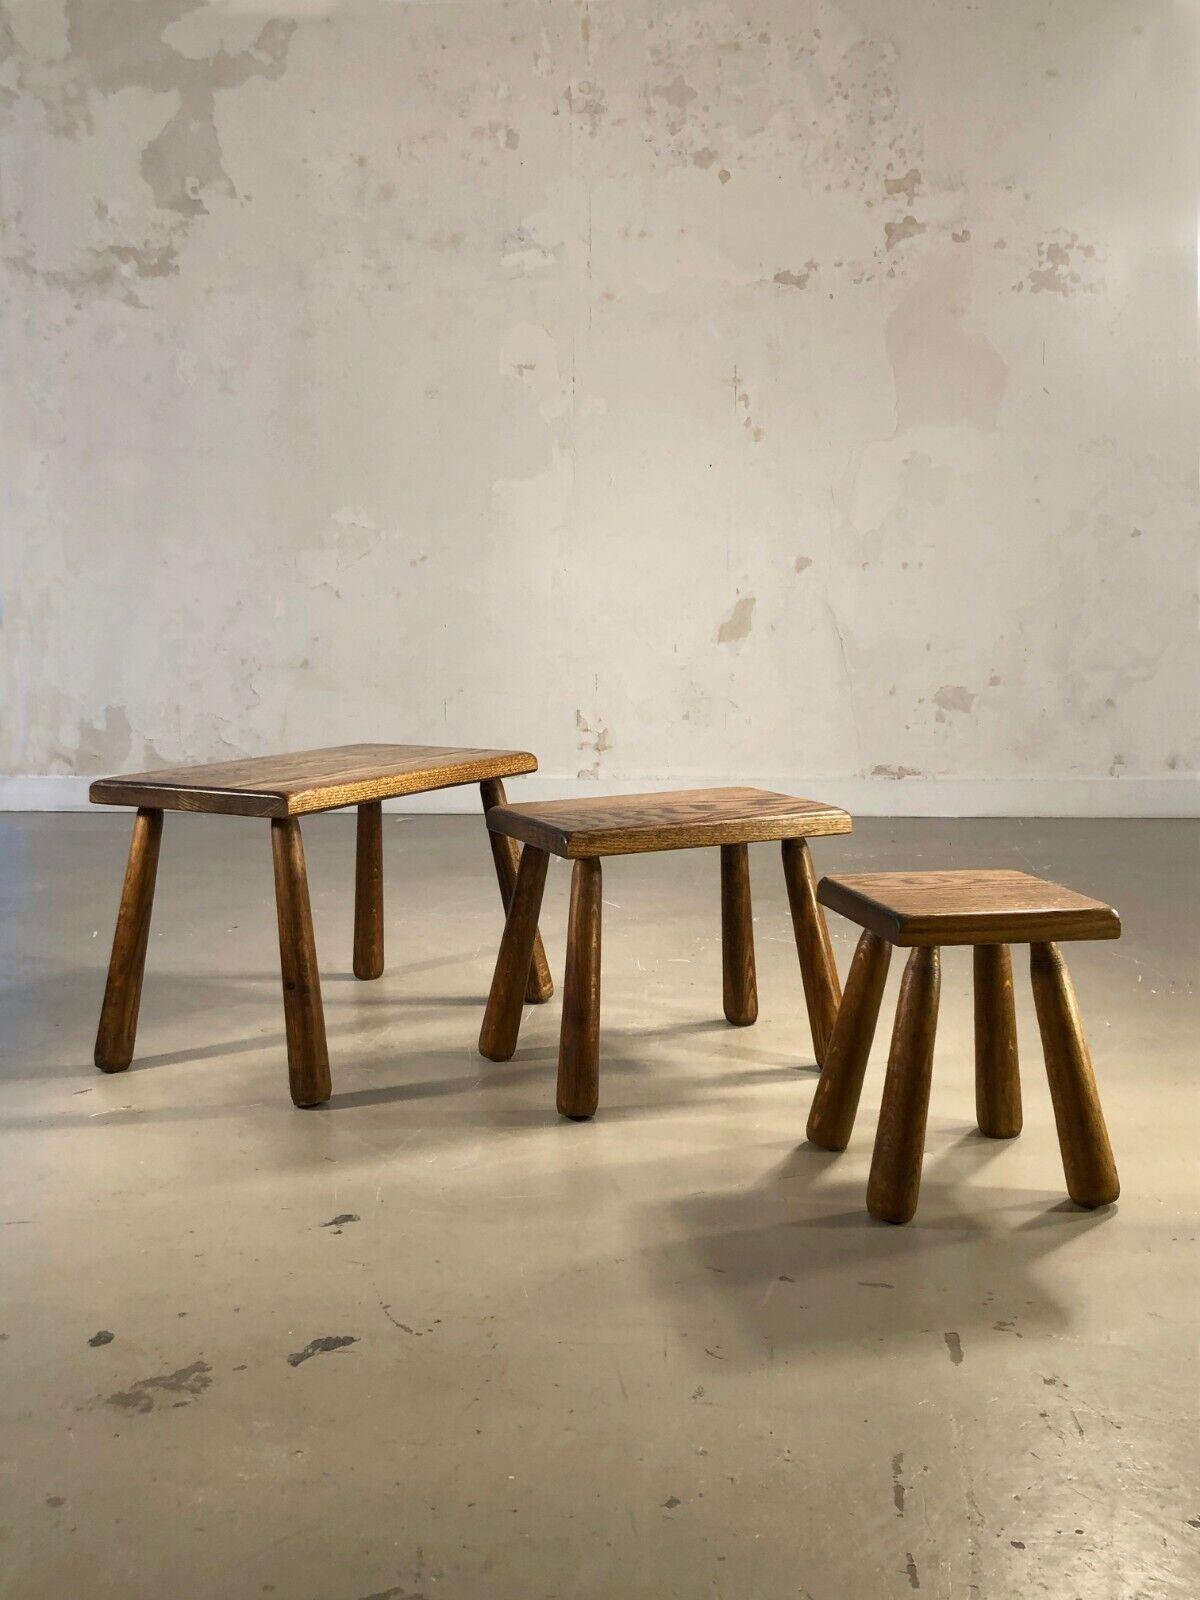 A set of 3 nesting tables, or side tables, bedside tables or end tables, Modernist, Brutalist, Popular Art, Free Form, in varnished solid wood, with club legs, To be attributed, France 1950-1960.

DIMENSIONS:
Large Table: 57 x 36.5 x 38.4 cm (Top 55